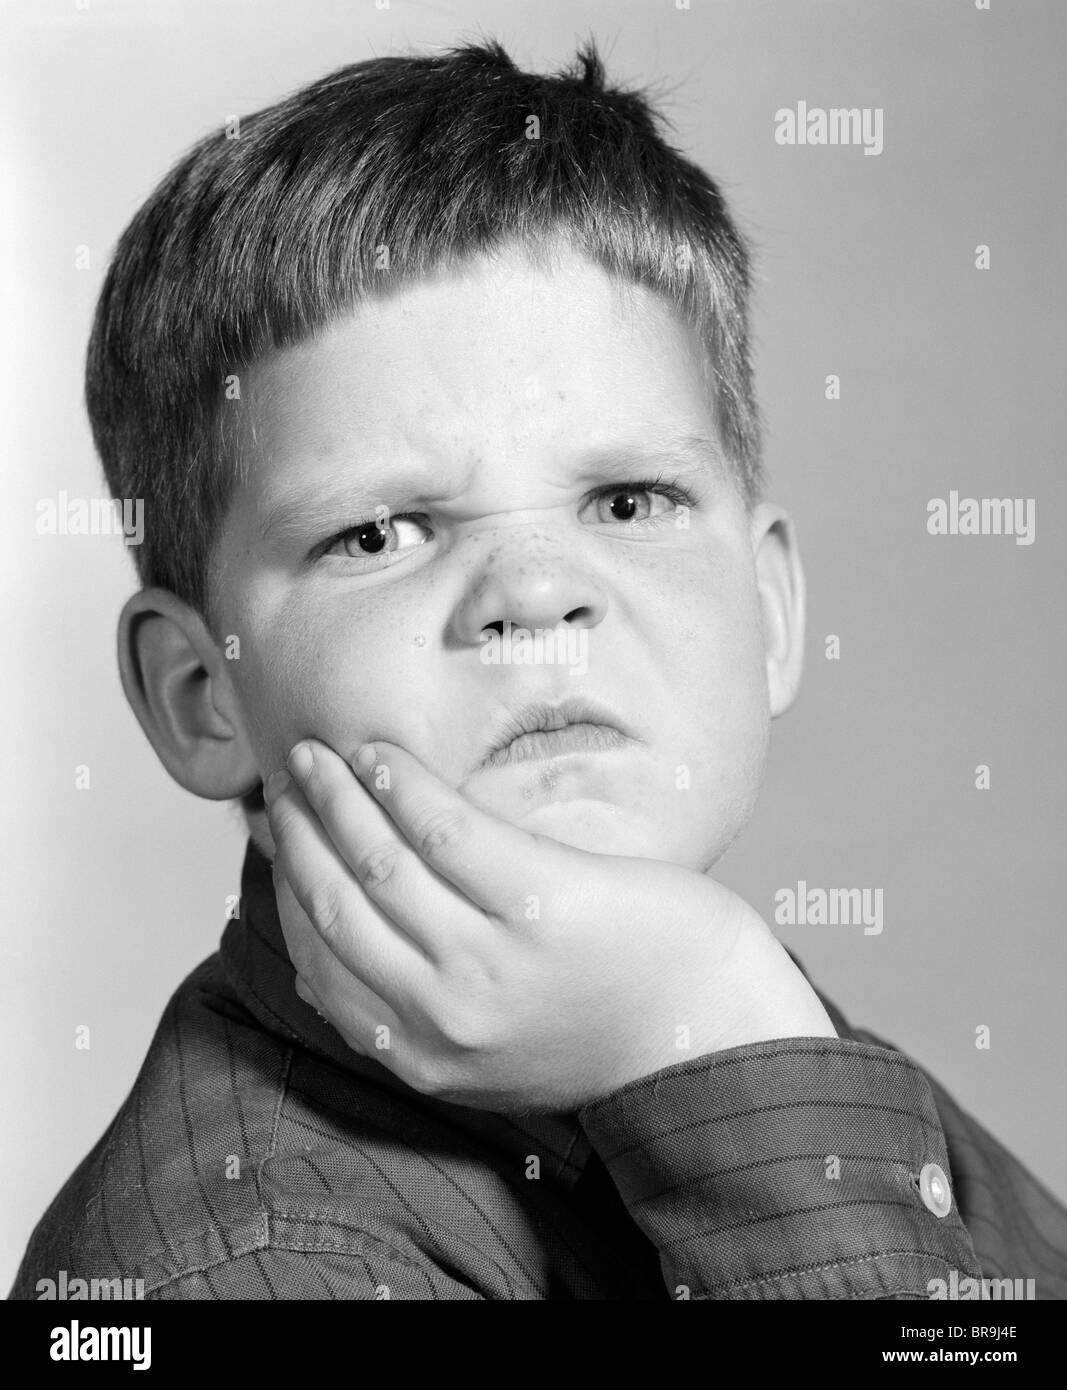 1960s LITTLE BOY MAKING ANGRY FUNNY FACIAL EXPRESSION LOOKING AT CAMERA Stock Photo